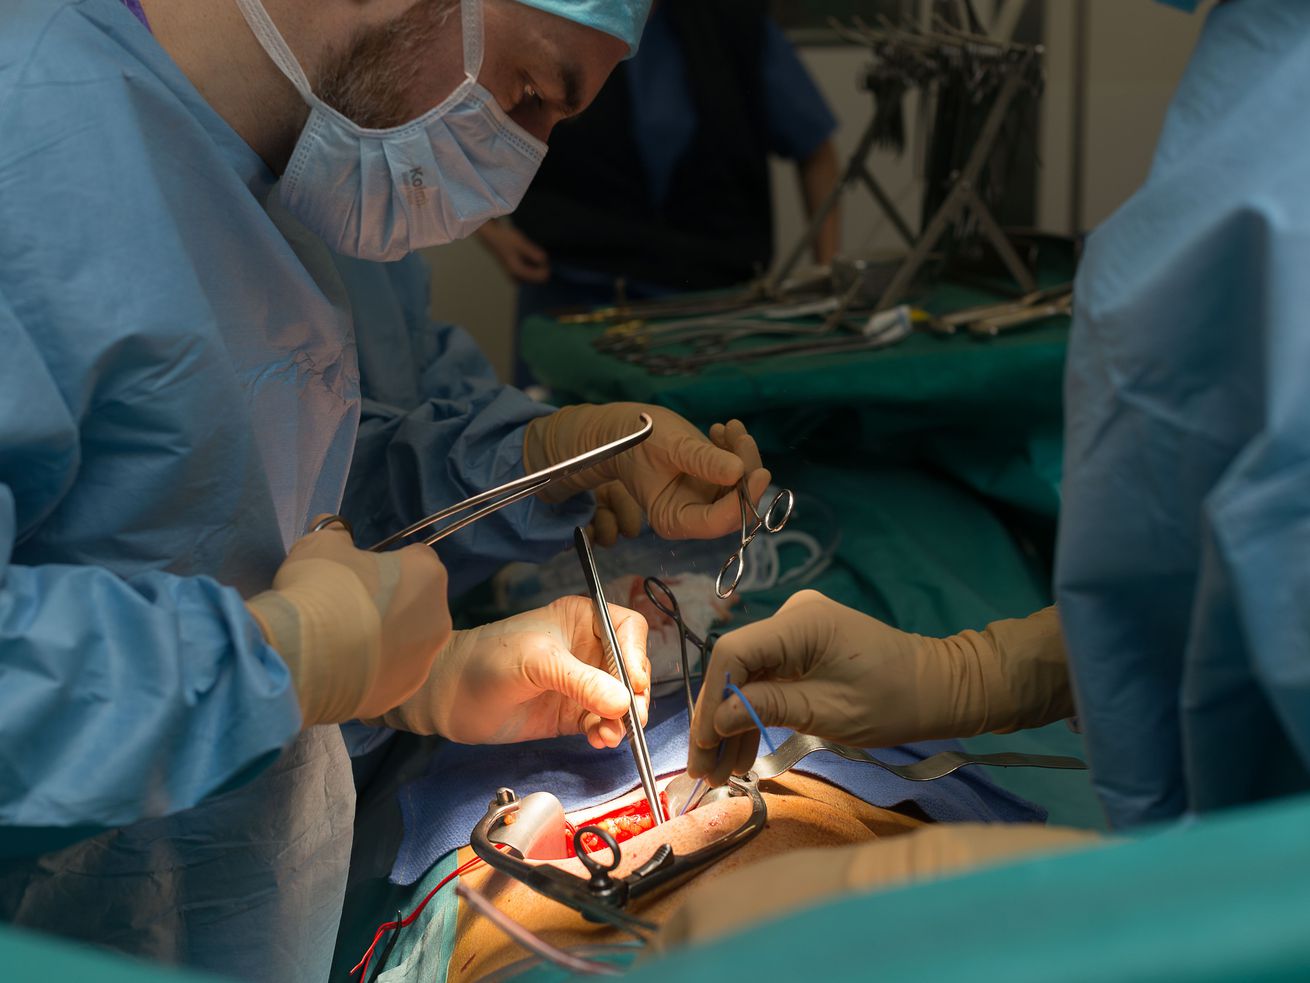 Kidney transplant surgeons operate on a patient.